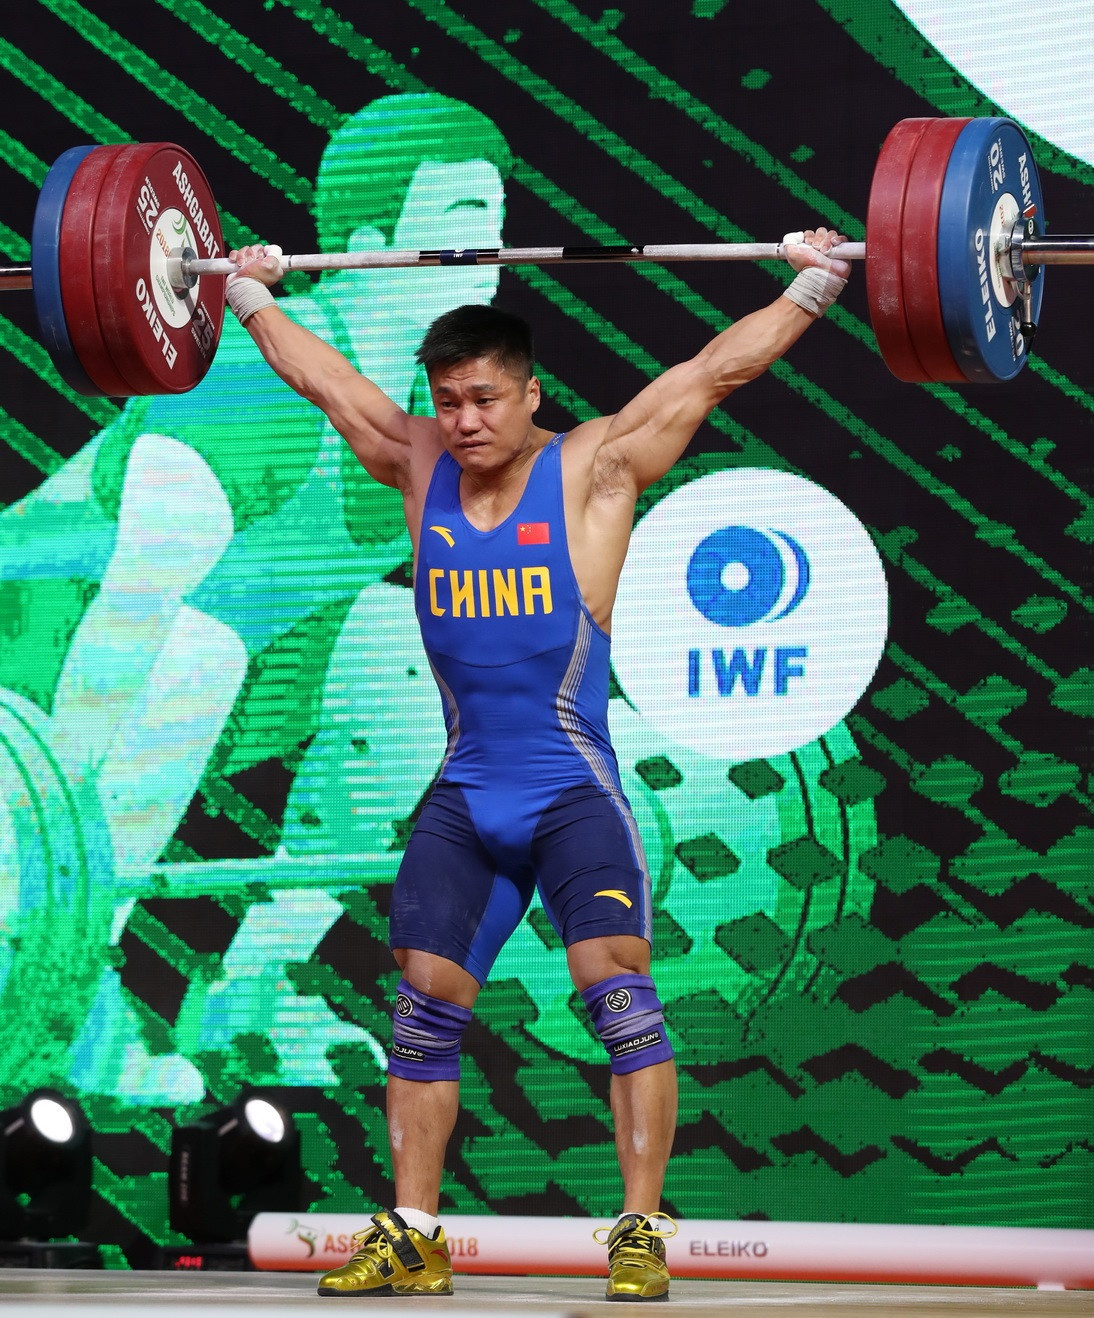 China's Lyu Xiaojun set a world standard total to win the overall men's 81kg gold medal ©IWF